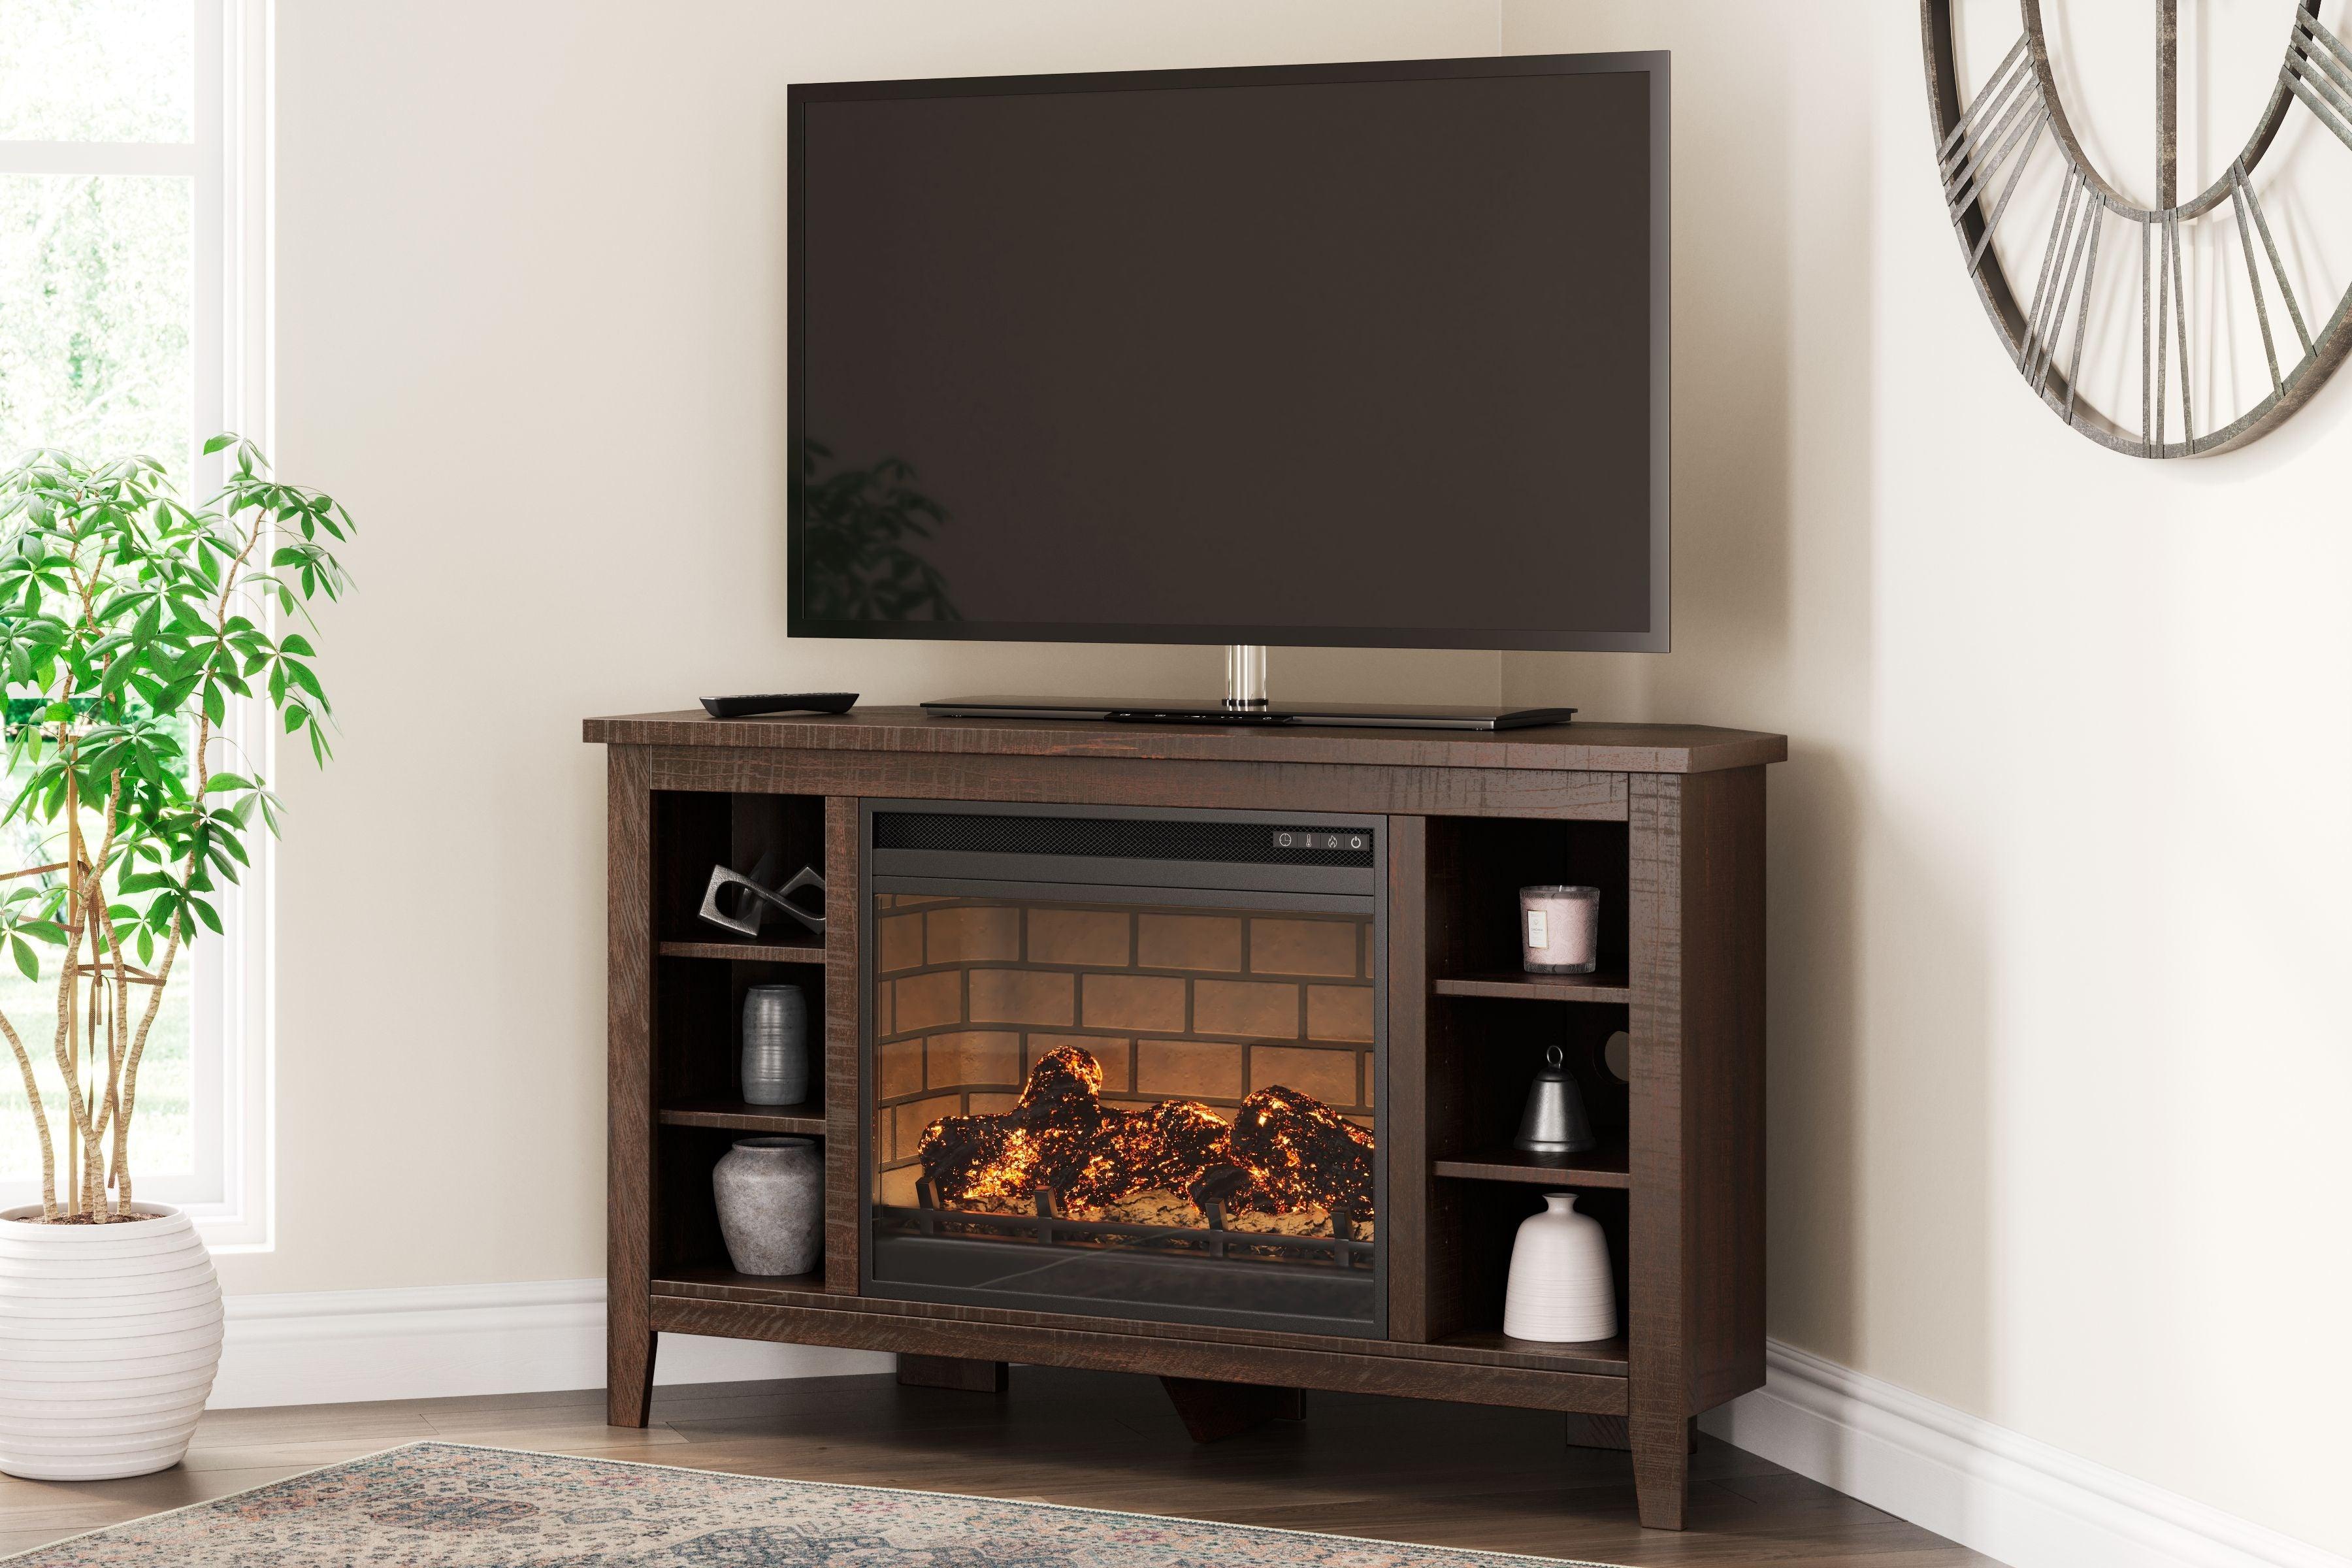 Signature Design by Ashley® - Camiburg - Warm Brown - Corner TV Stand With Faux Firebrick Fireplace Insert - 5th Avenue Furniture